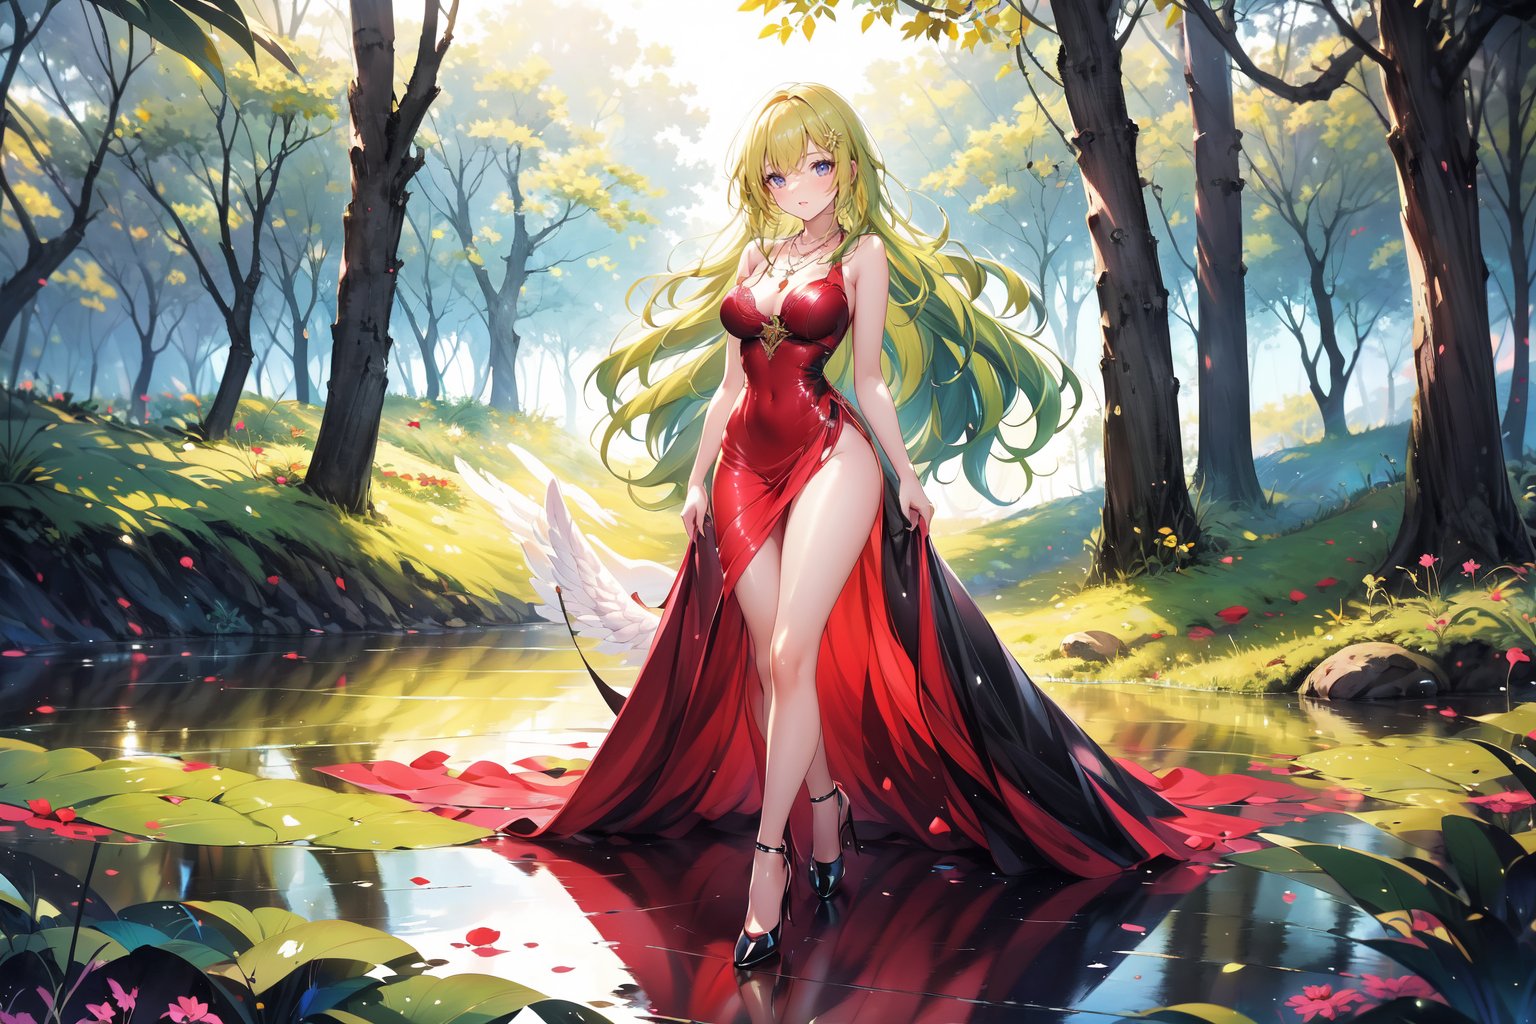 A 25-year-old girl, with long green and wavy hair, a breastless evening dress, red stockings, high heels, a necklace, and angel wings, on the shore of a forest lake.